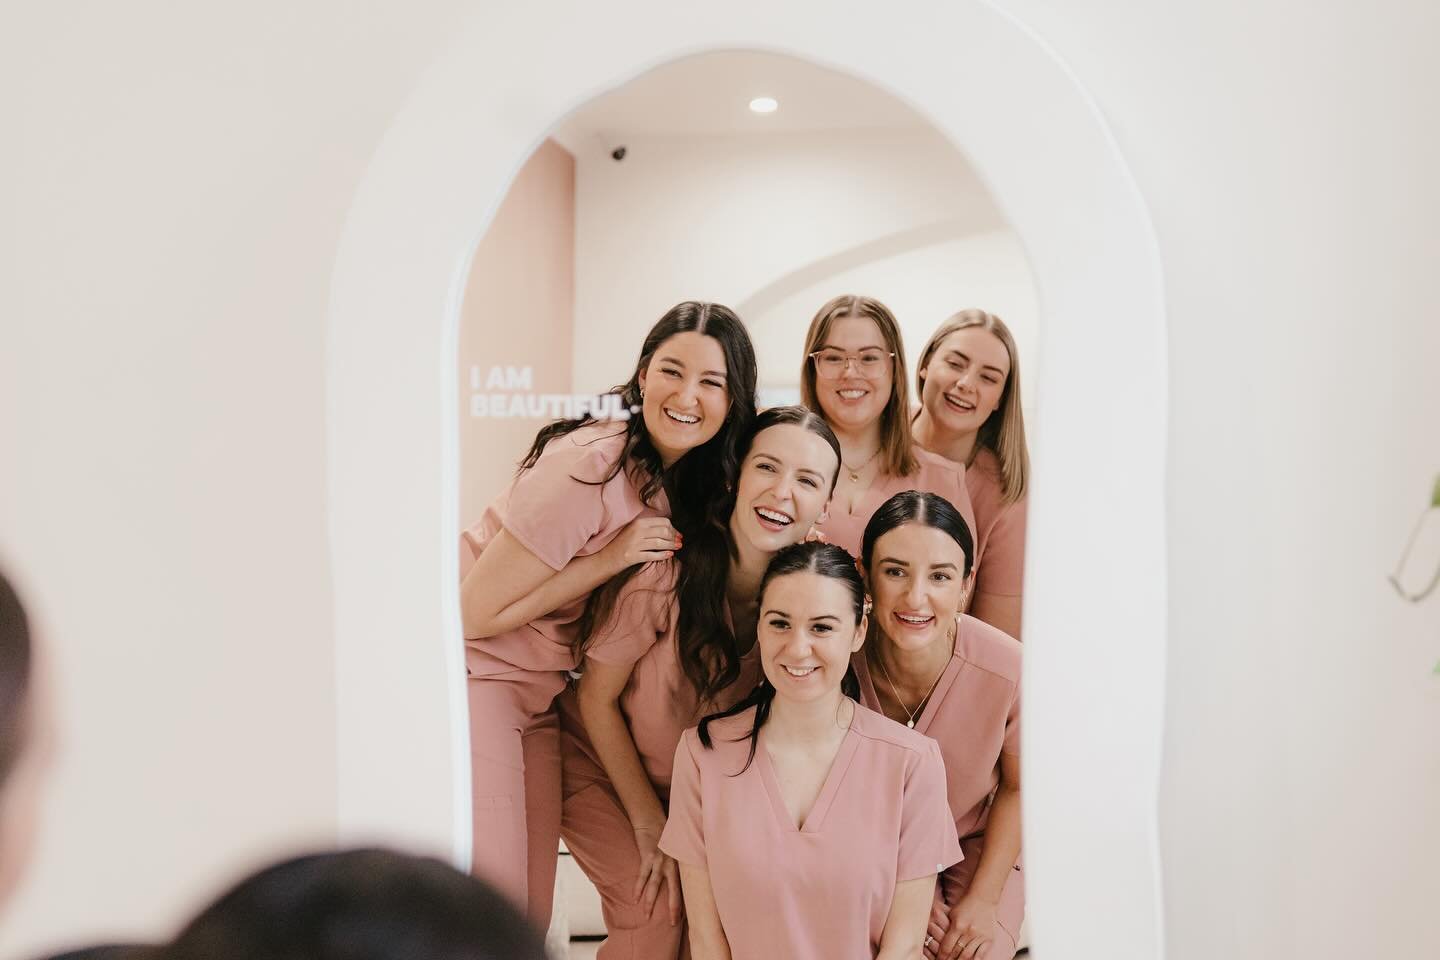 @elysianbeautyandwellness 

On workday&rsquo;s, they wear pink! 👚💅🏼